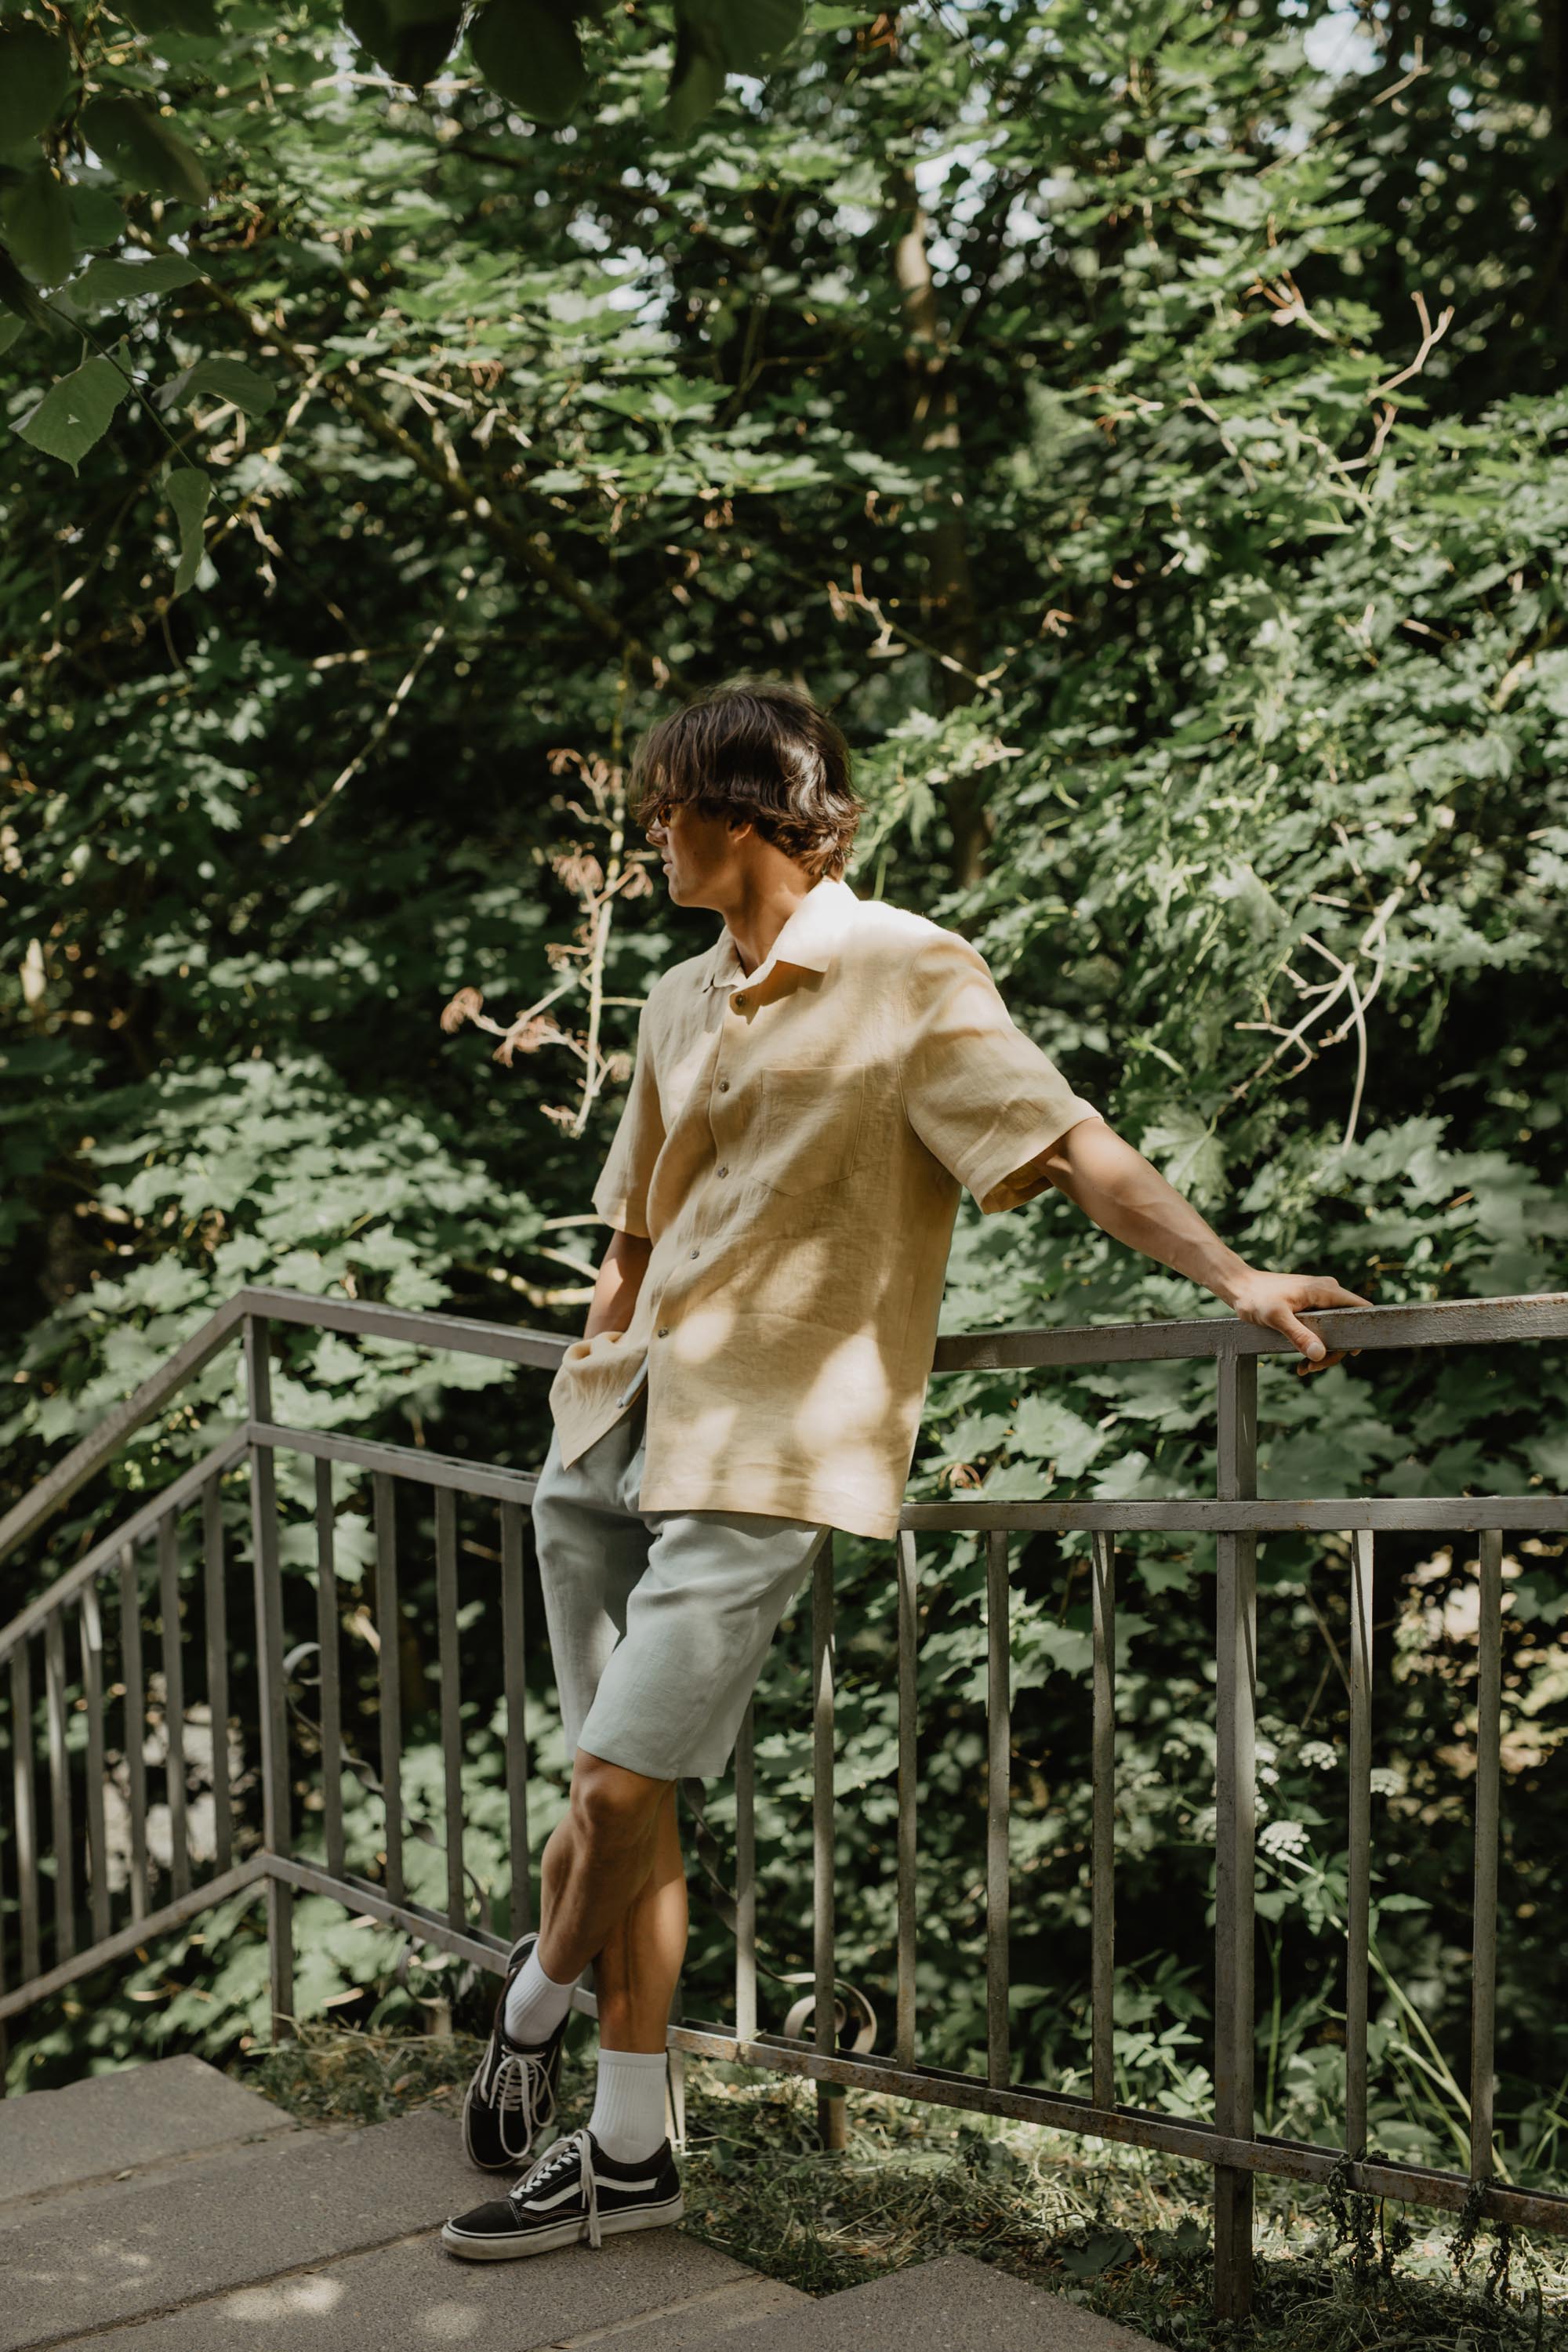 Man Leaning Against Railing Wearing Sage Green Linen Shorts And Mustard Short Sleeved Shirt